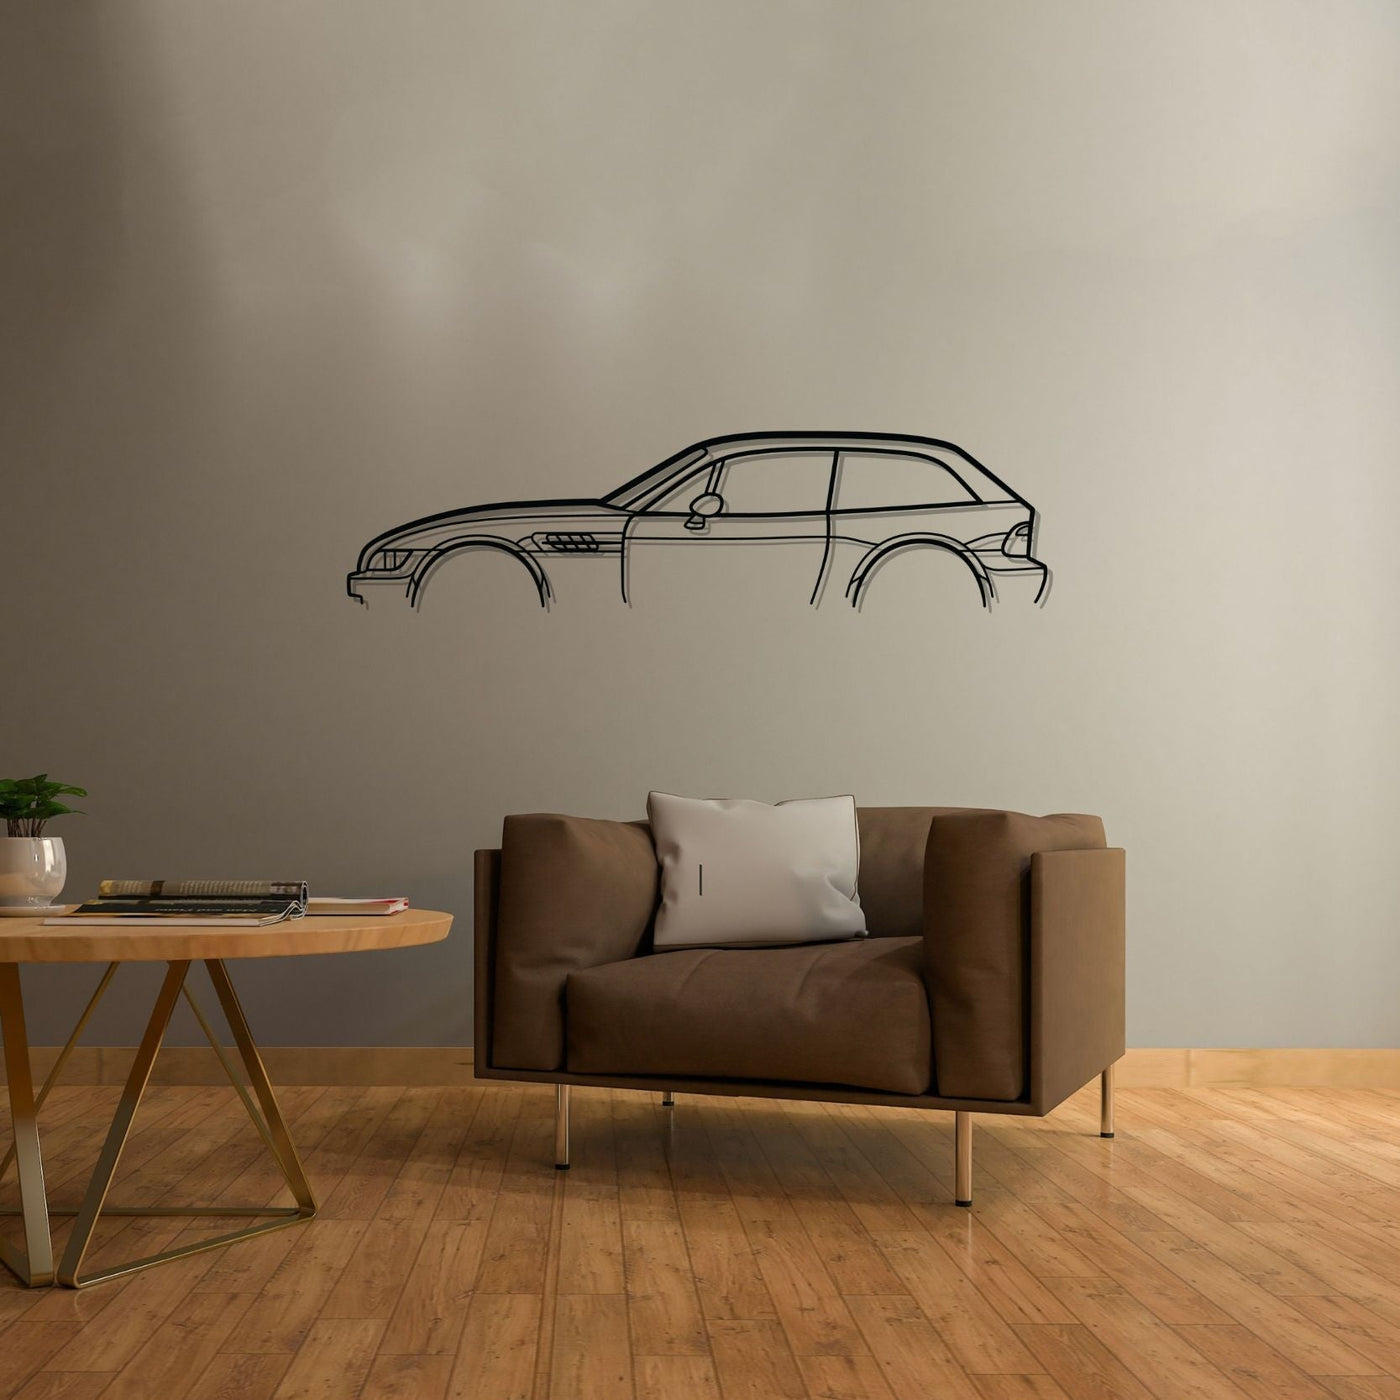 Z3 M Coupe Classic Metal Silhouette Wall Art